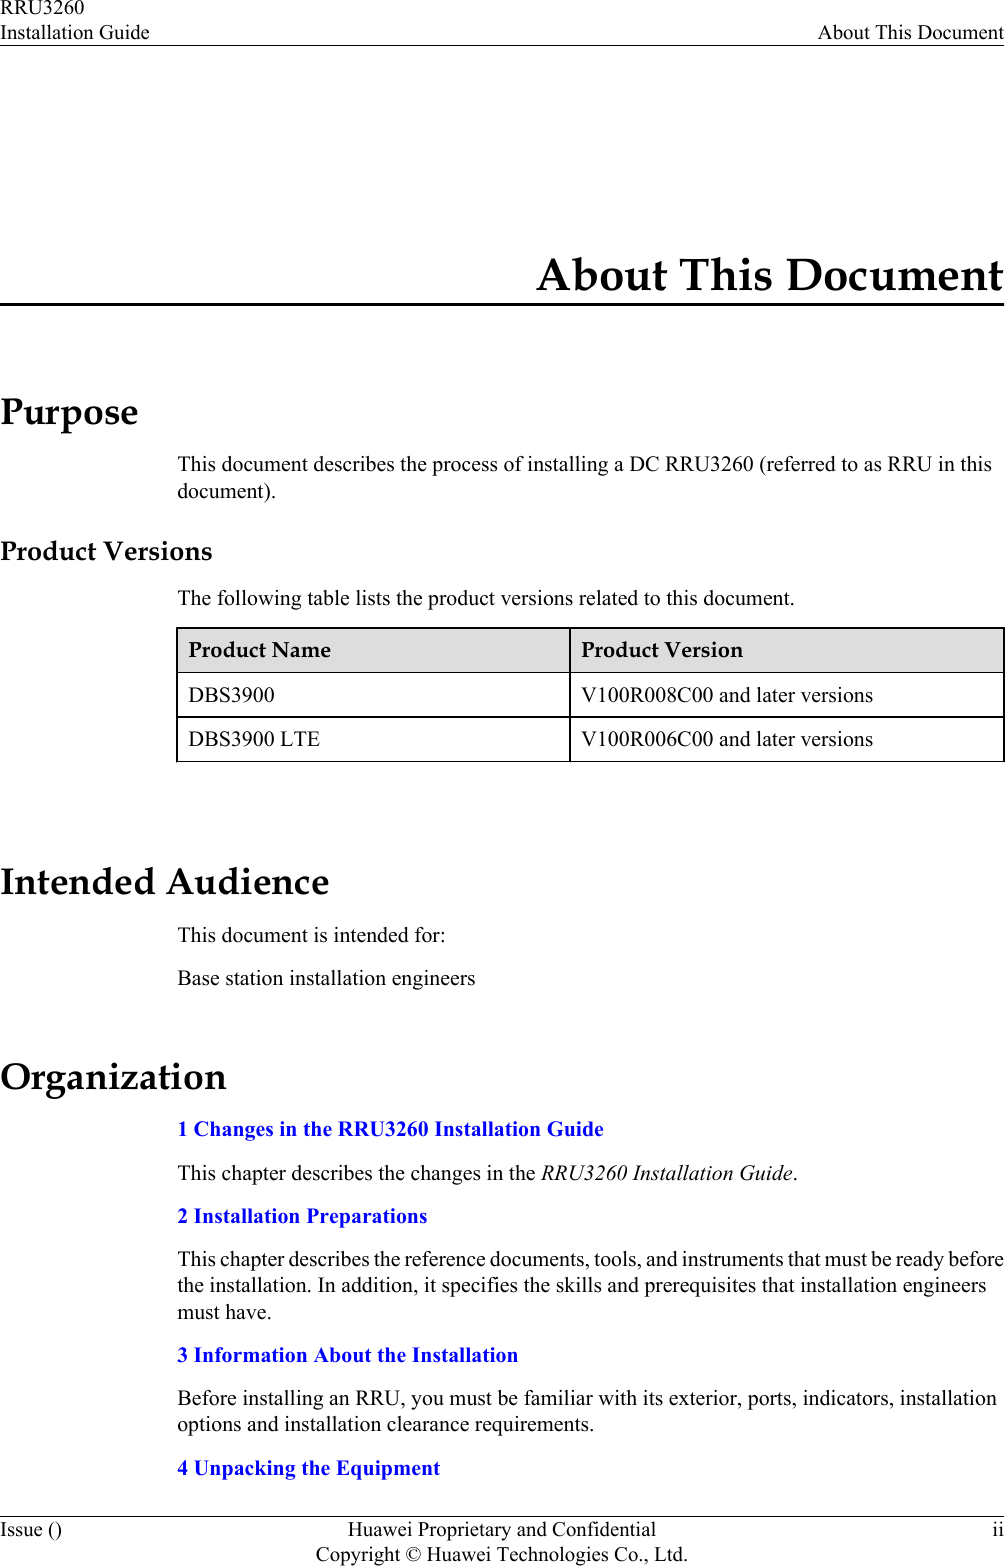 About This DocumentPurposeThis document describes the process of installing a DC RRU3260 (referred to as RRU in thisdocument).Product VersionsThe following table lists the product versions related to this document.Product Name Product VersionDBS3900 V100R008C00 and later versionsDBS3900 LTE V100R006C00 and later versions Intended AudienceThis document is intended for:Base station installation engineersOrganization1 Changes in the RRU3260 Installation GuideThis chapter describes the changes in the RRU3260 Installation Guide.2 Installation PreparationsThis chapter describes the reference documents, tools, and instruments that must be ready beforethe installation. In addition, it specifies the skills and prerequisites that installation engineersmust have.3 Information About the InstallationBefore installing an RRU, you must be familiar with its exterior, ports, indicators, installationoptions and installation clearance requirements.4 Unpacking the EquipmentRRU3260Installation Guide About This DocumentIssue () Huawei Proprietary and ConfidentialCopyright © Huawei Technologies Co., Ltd.ii